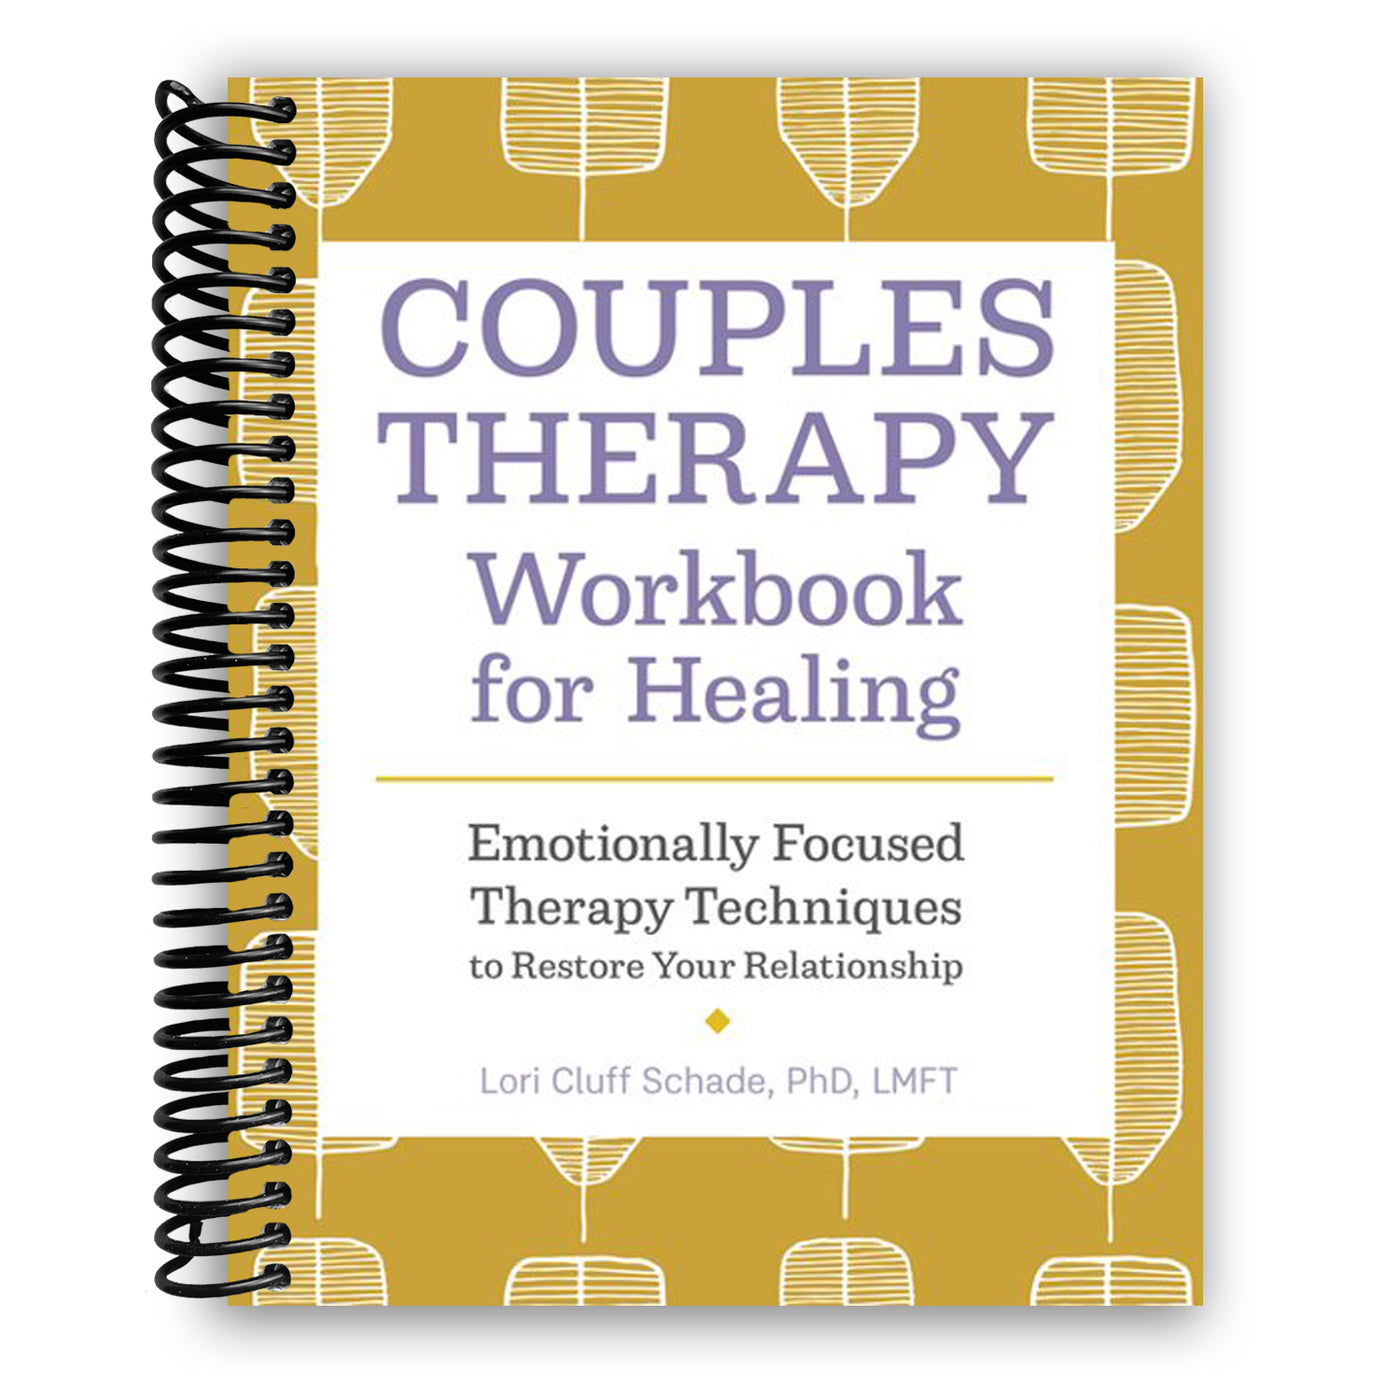 Couples Therapy Workbook for Healing: Emotionally Focused Therapy Techniques to Restore Your Relationship (Spiral Bound)